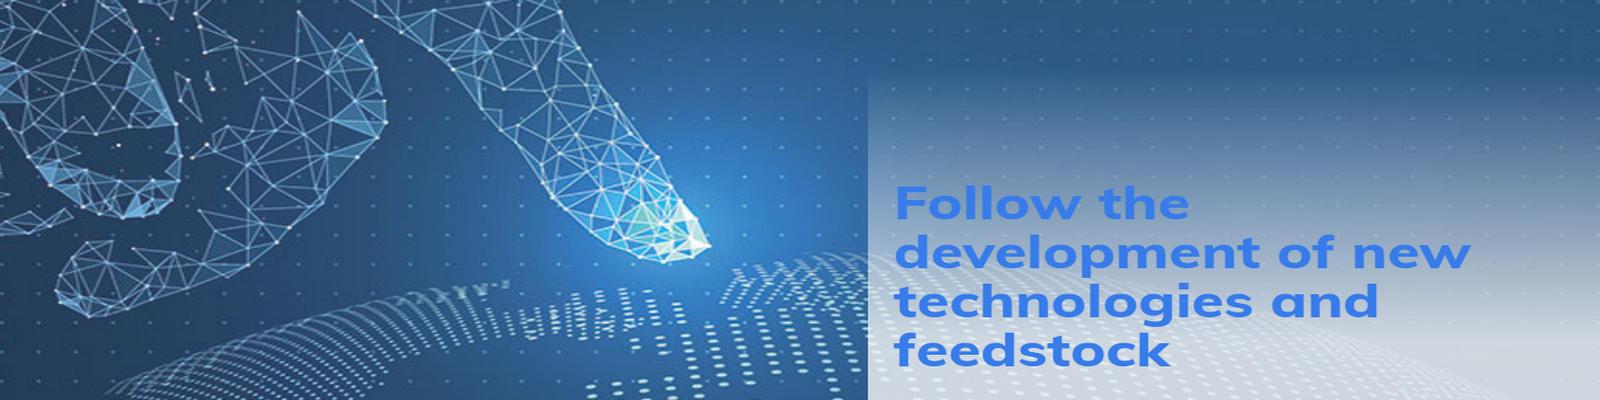 Follow the development of new techologies and feedstock